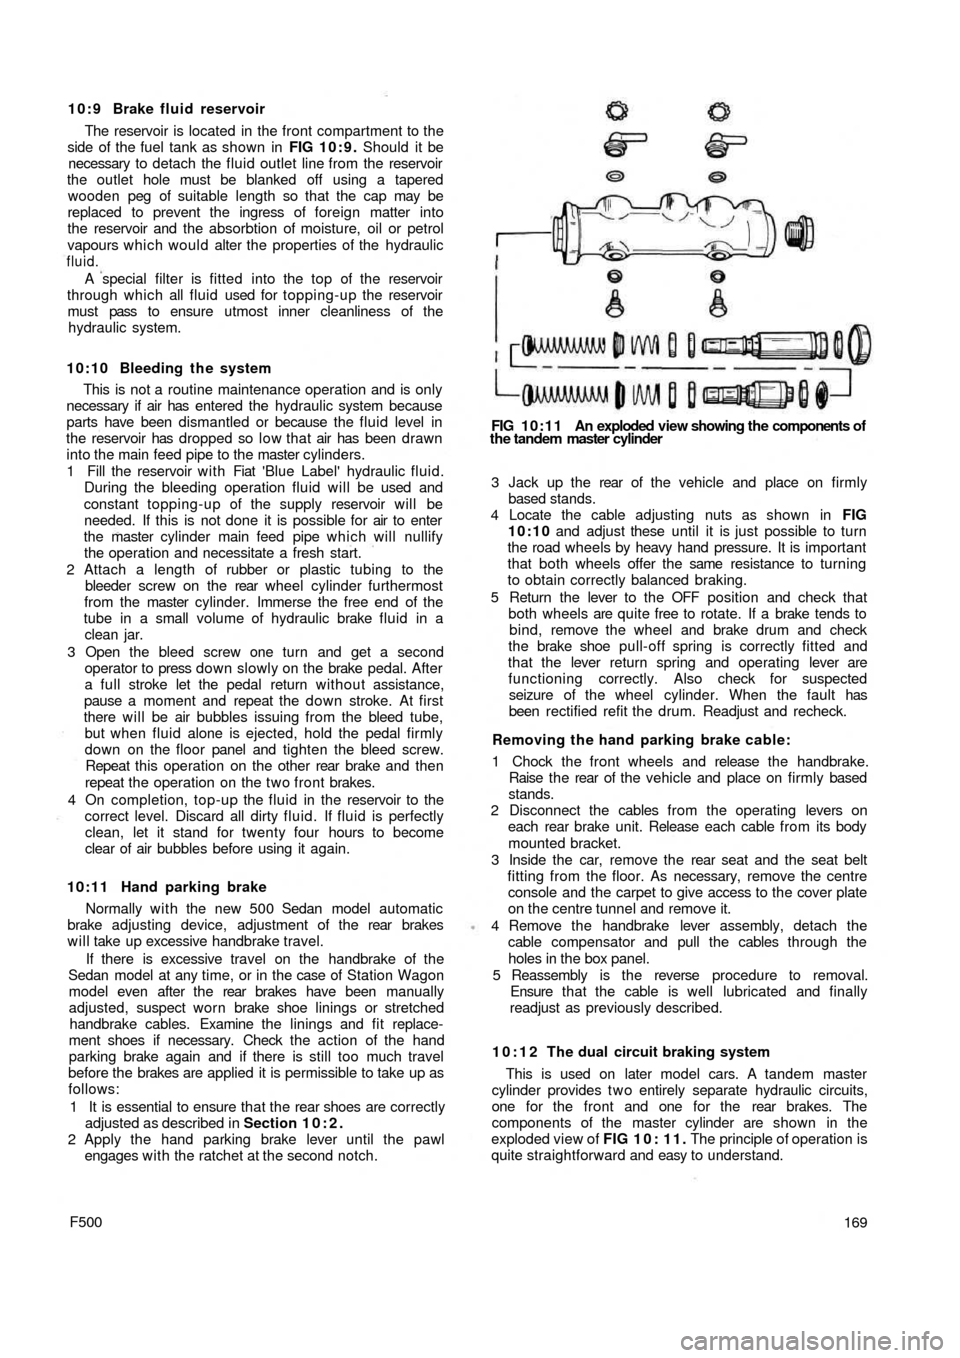 FIAT 500 1960 1.G Workshop Manual 10:9 Brake fluid reservoir
The reservoir is located in the front compartment to the
side of the fuel tank as shown  in FIG 10:9. Should it be
necessary to detach the fluid outlet line from  the reserv